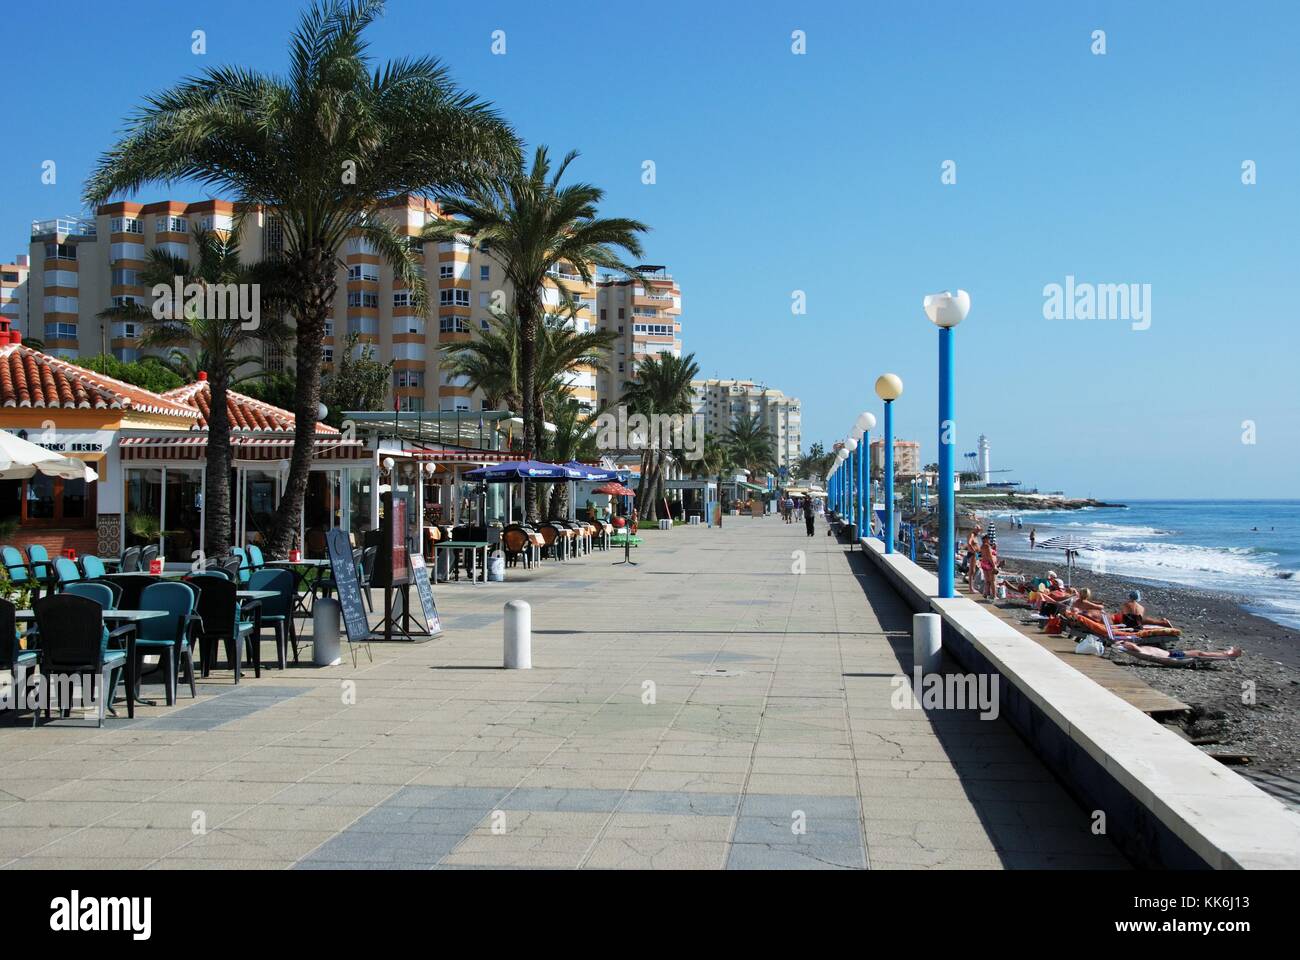 View along the promenade with pavement cafes to the left hand side and tourists relaxing the beach to the right, Torrox Costa, Malaga Province, Andalu Stock Photo